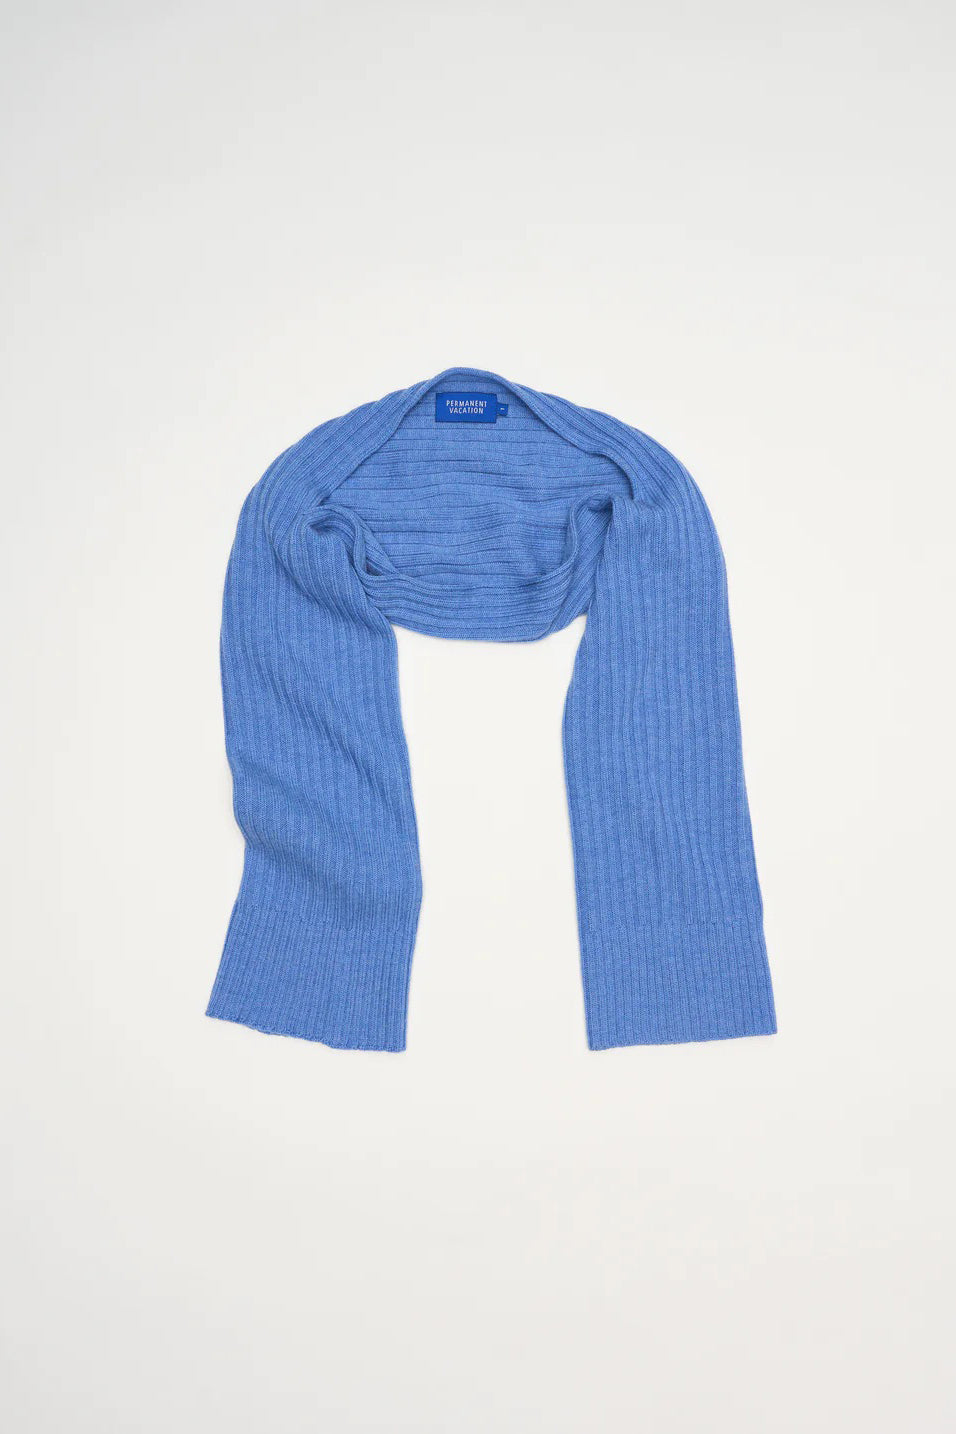 PV Echo Knitted Shrug // Pure Blue